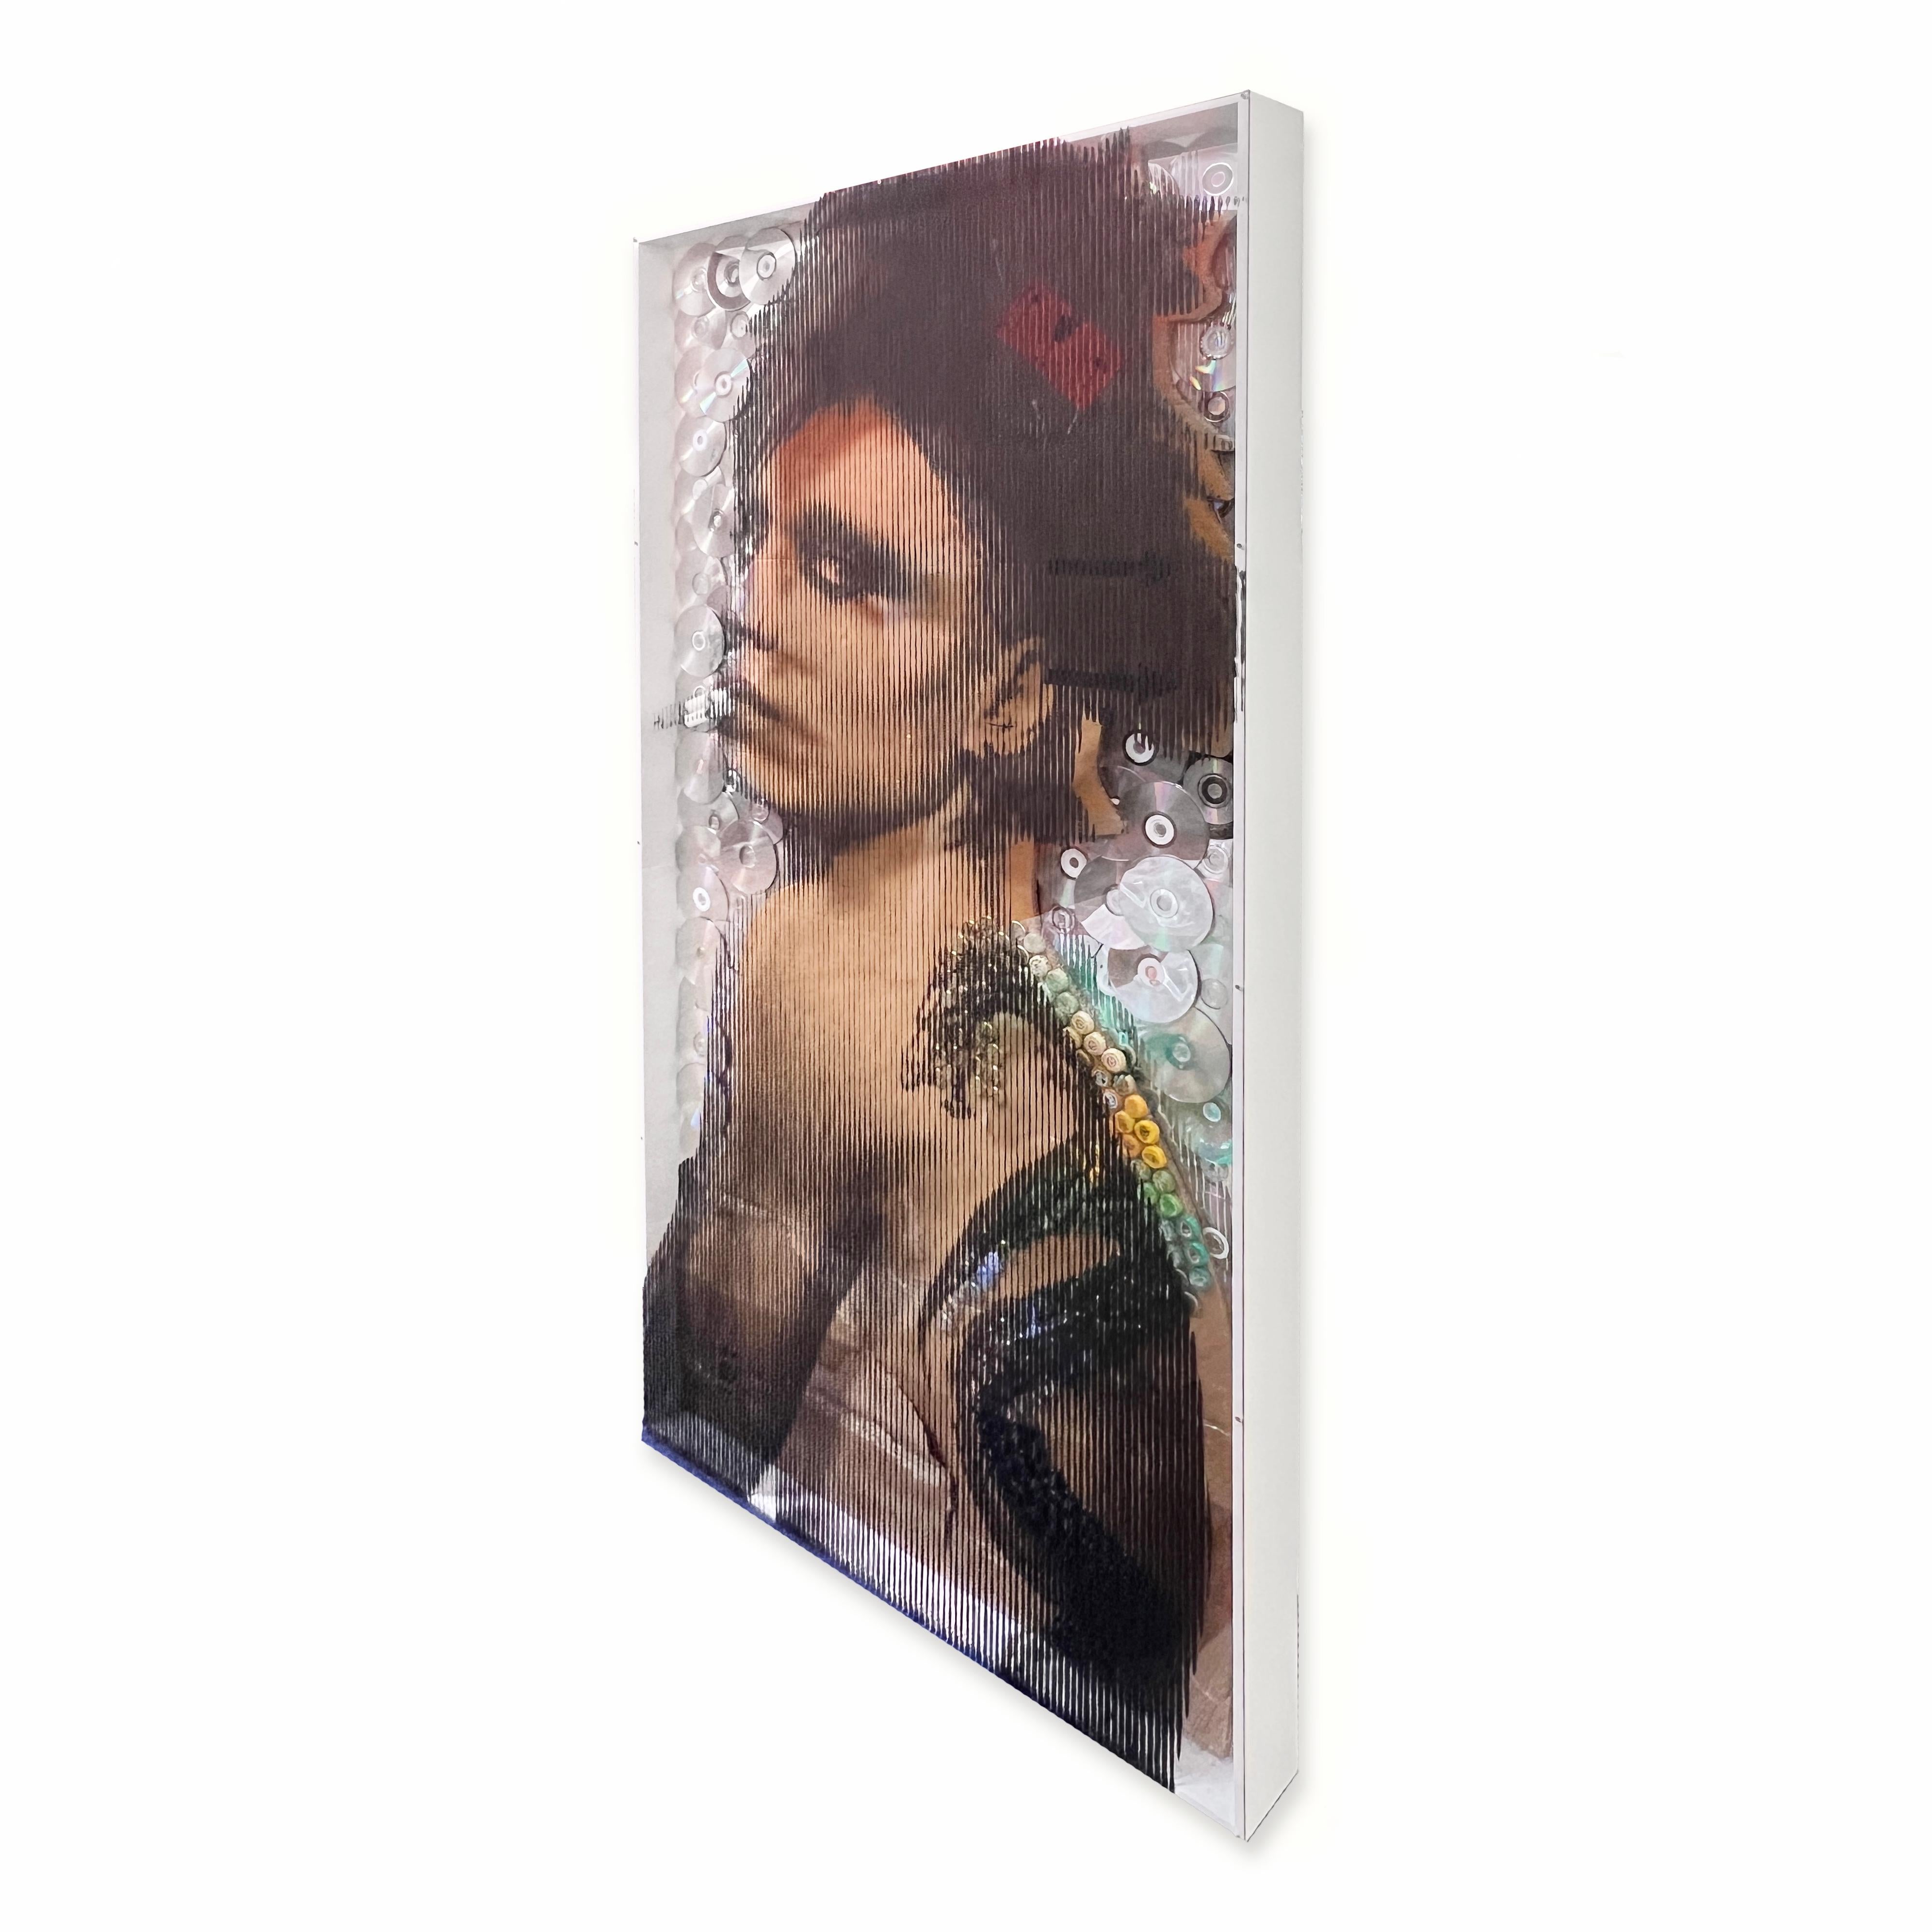 This vertical 79 inch high and 39.5 inch wide and 4 inch deep installation artwork is a one-of-a-kind creation. The half inch white edge of the shadowbox make the frame around the piece, and it contains found and recycled materials such as